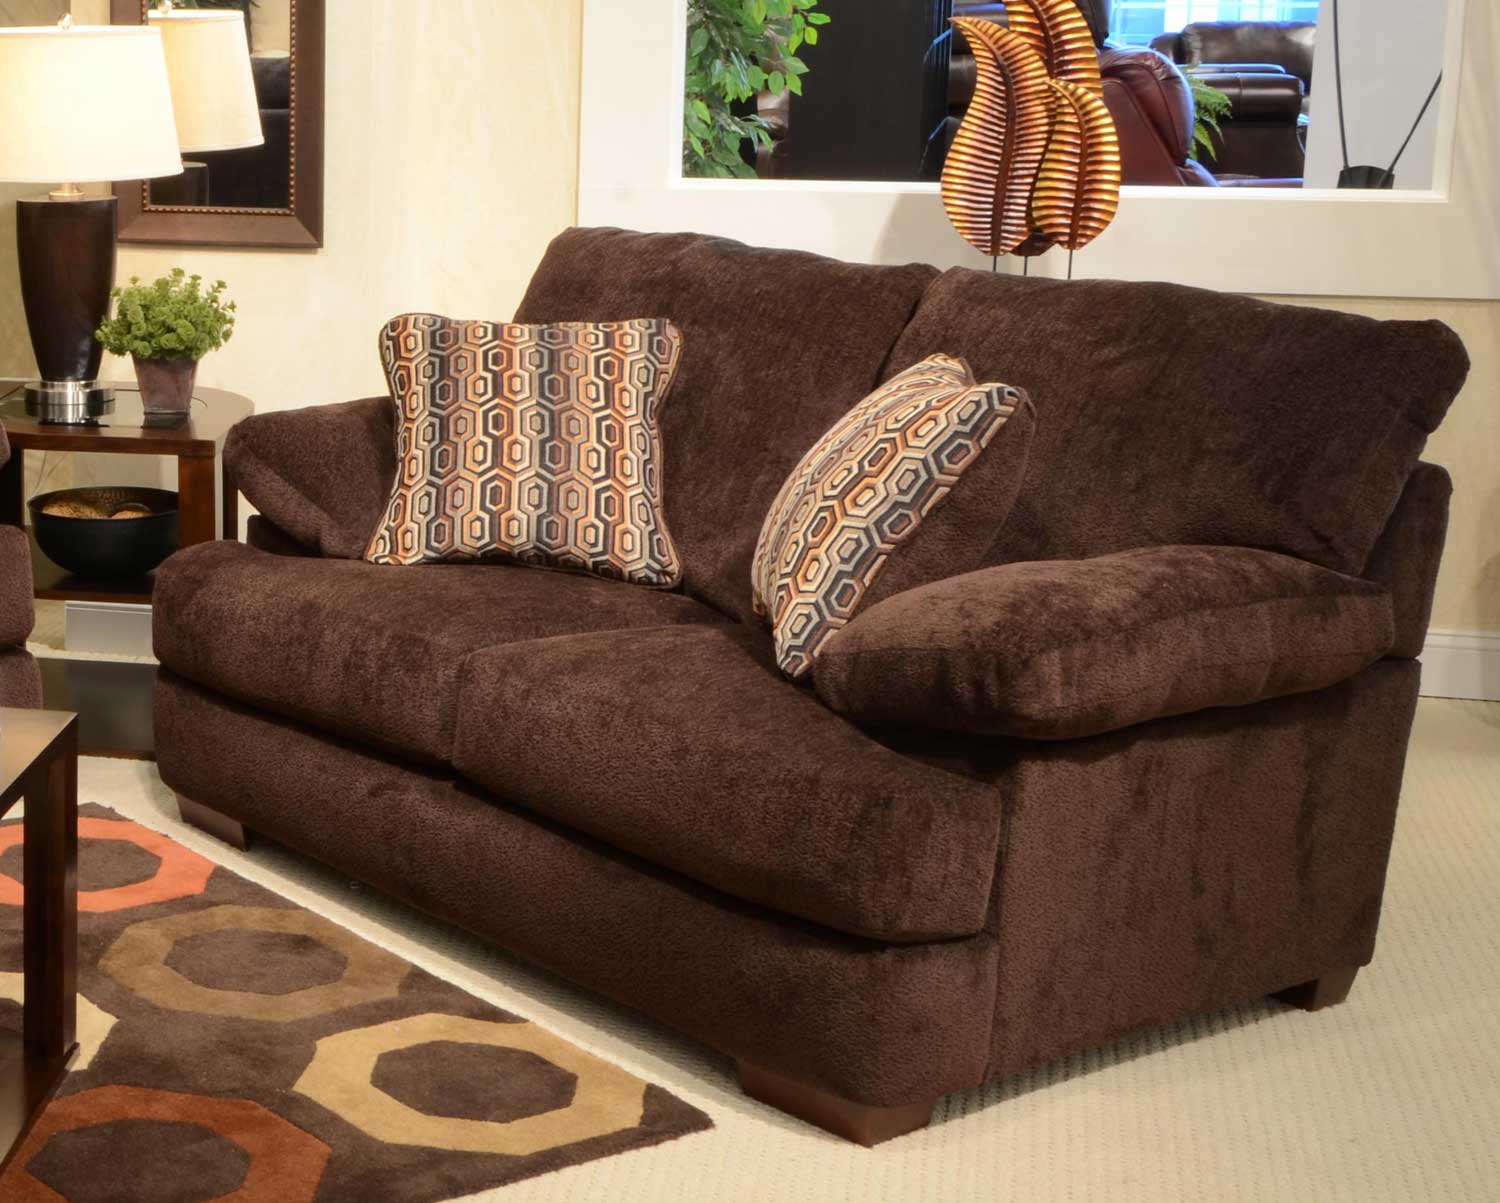 Jackson Armstrong Loveseat - Chocolate Color